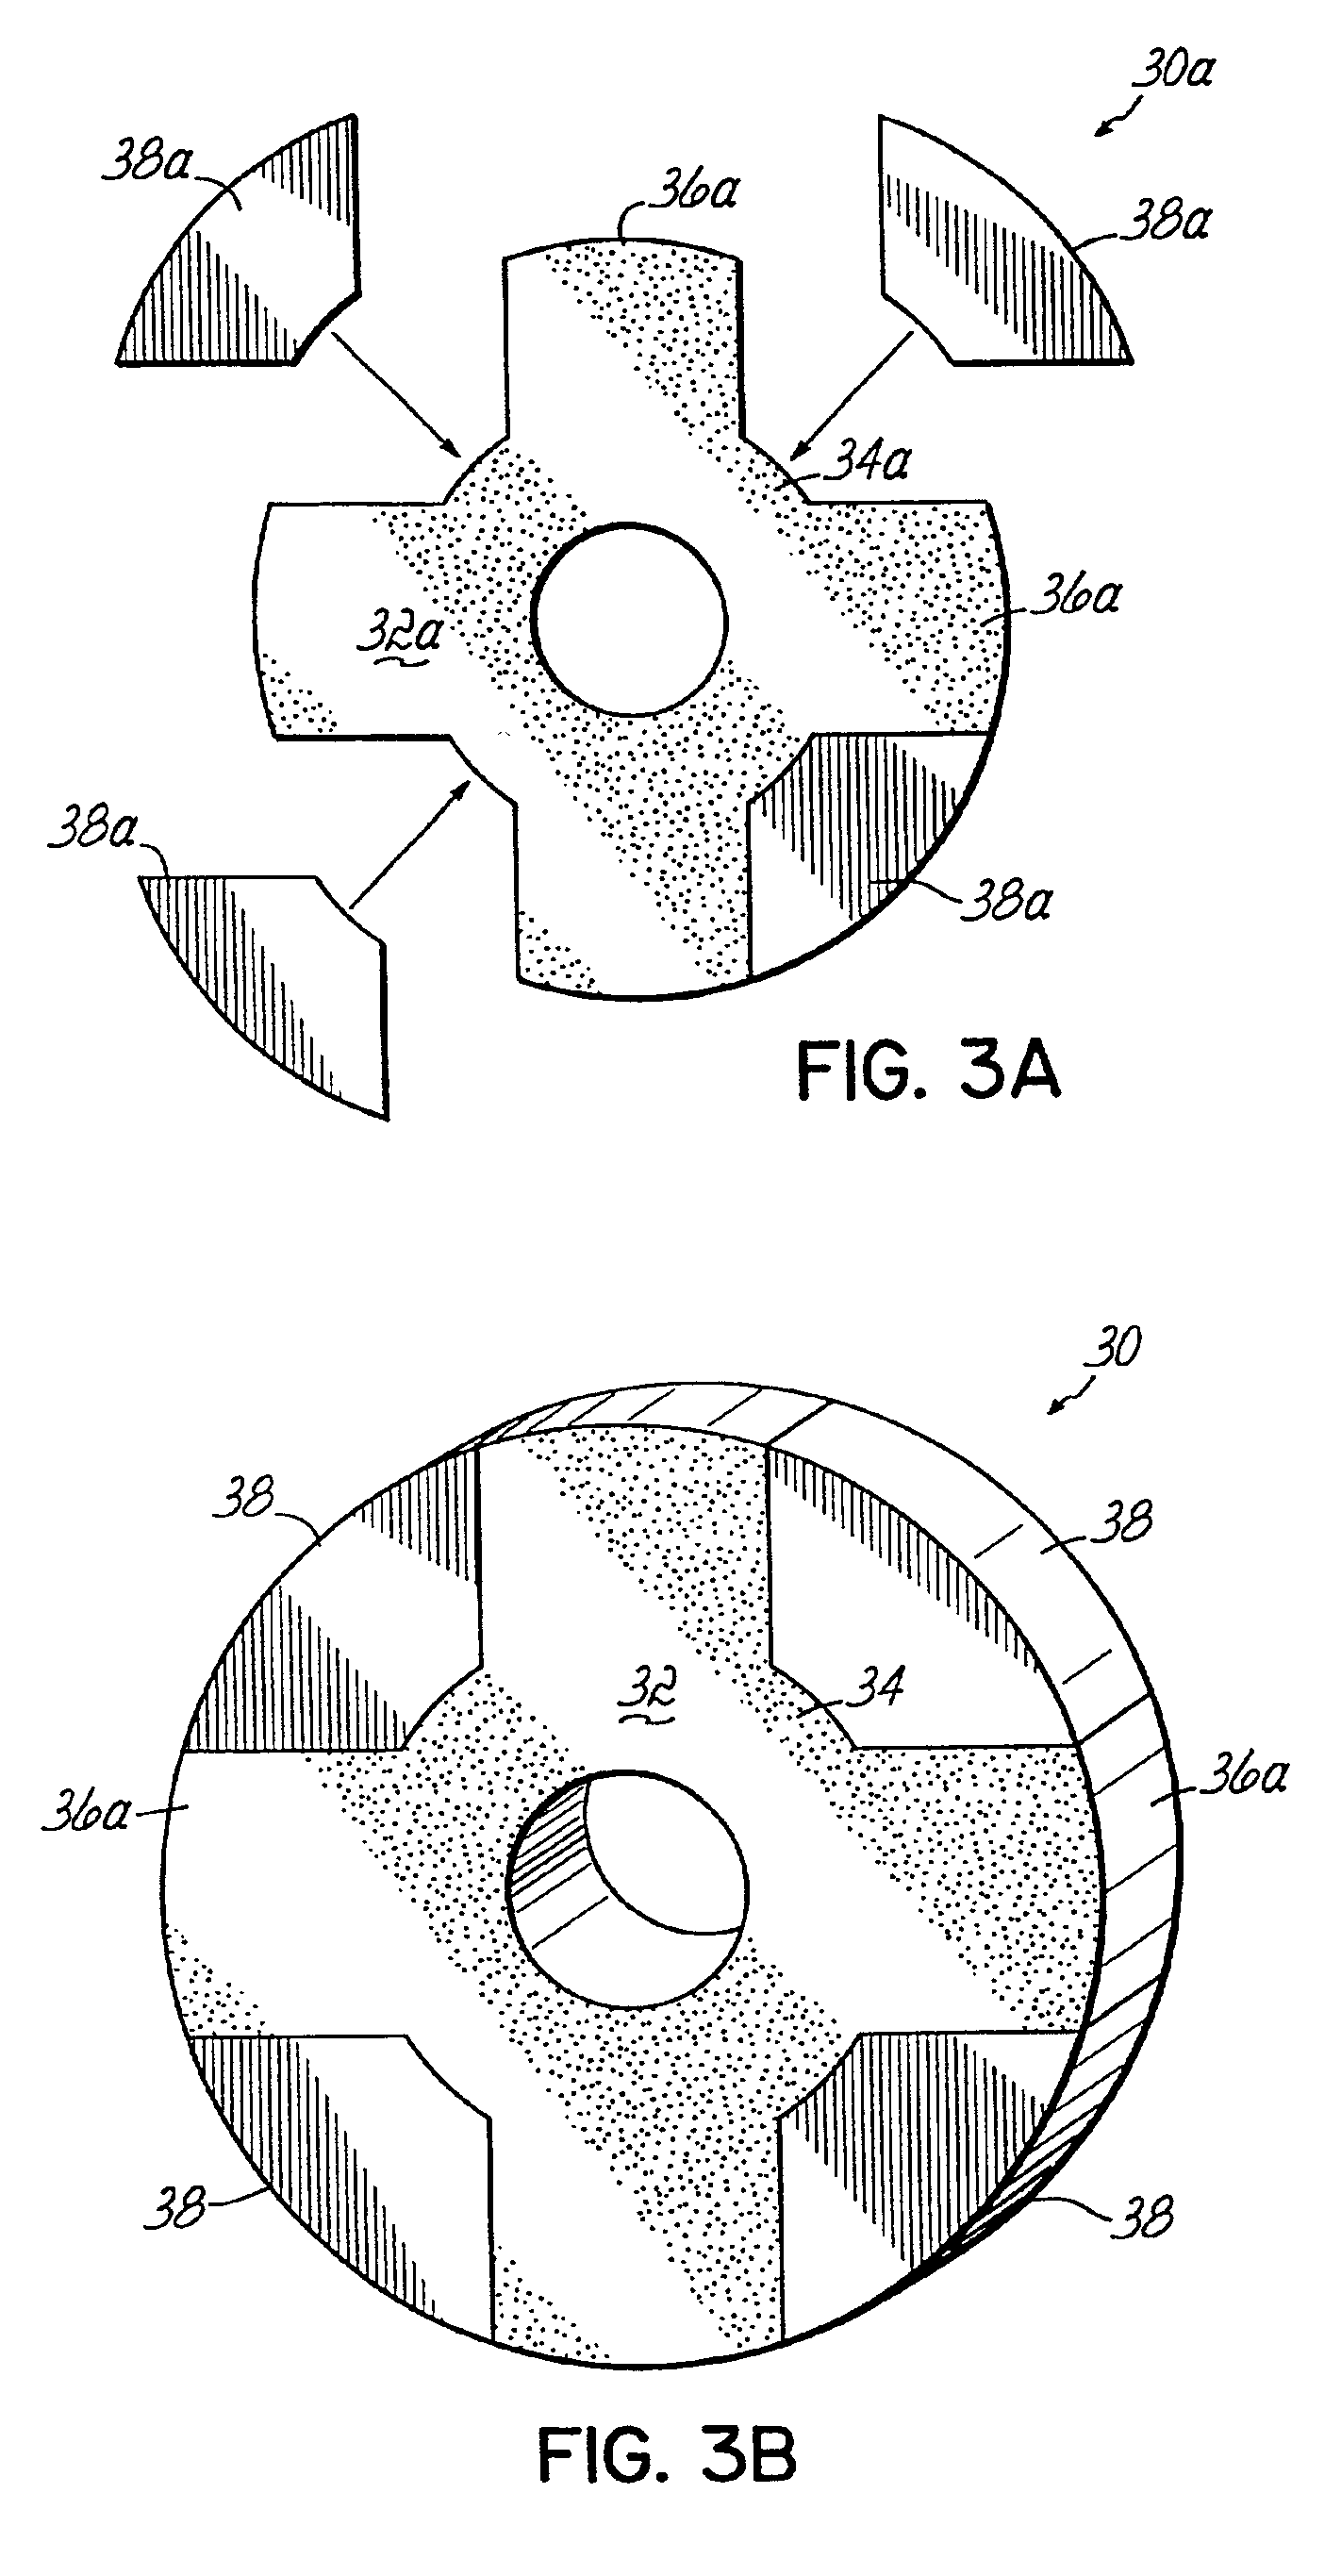 Method of making a composite electric machine component of a desired magnetic pattern